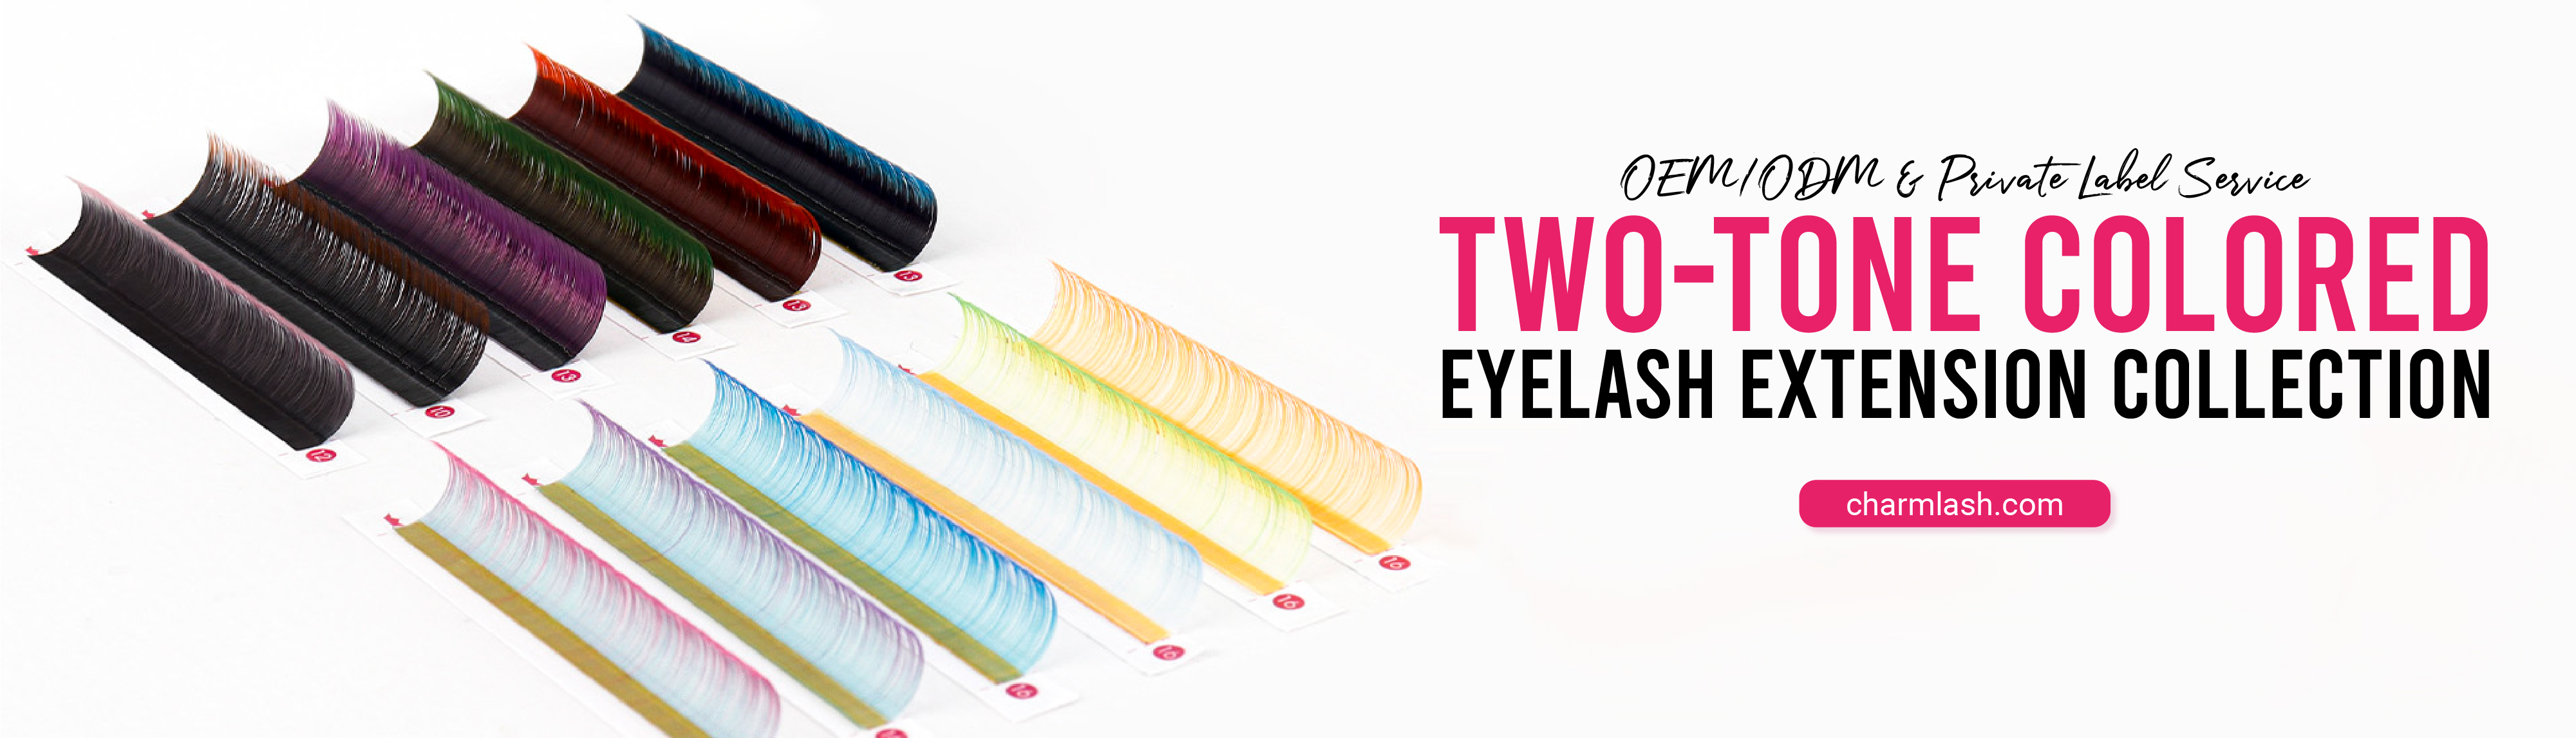 two tone lashes two tone lash extensions two toned lashes two tone color eyelash extensions two tone eyelashes two tone eyelash extensions ombre lash extensions ombre lashes